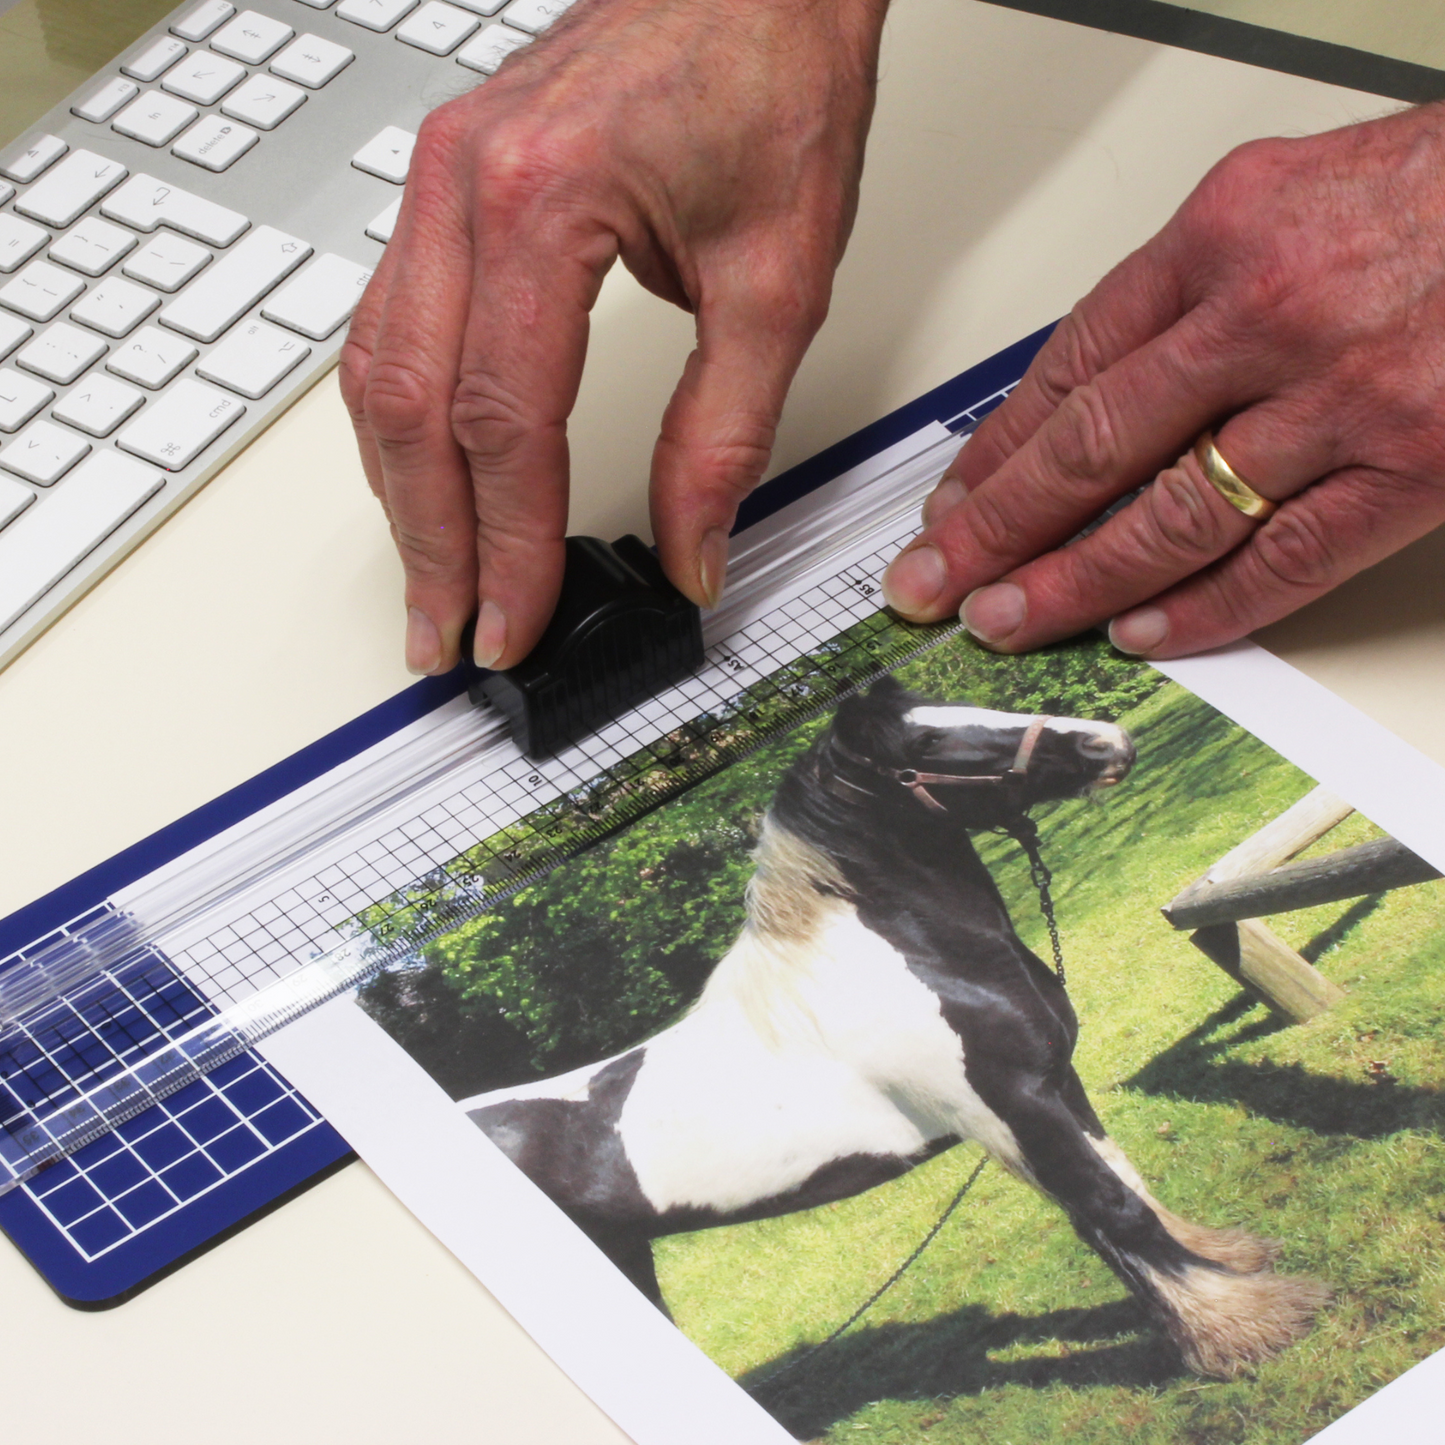 Hands using a transparent cutting ruler with a black grip to trim a photo of a horse on an A4 blue cutting mat, with a computer keyboard in the background.